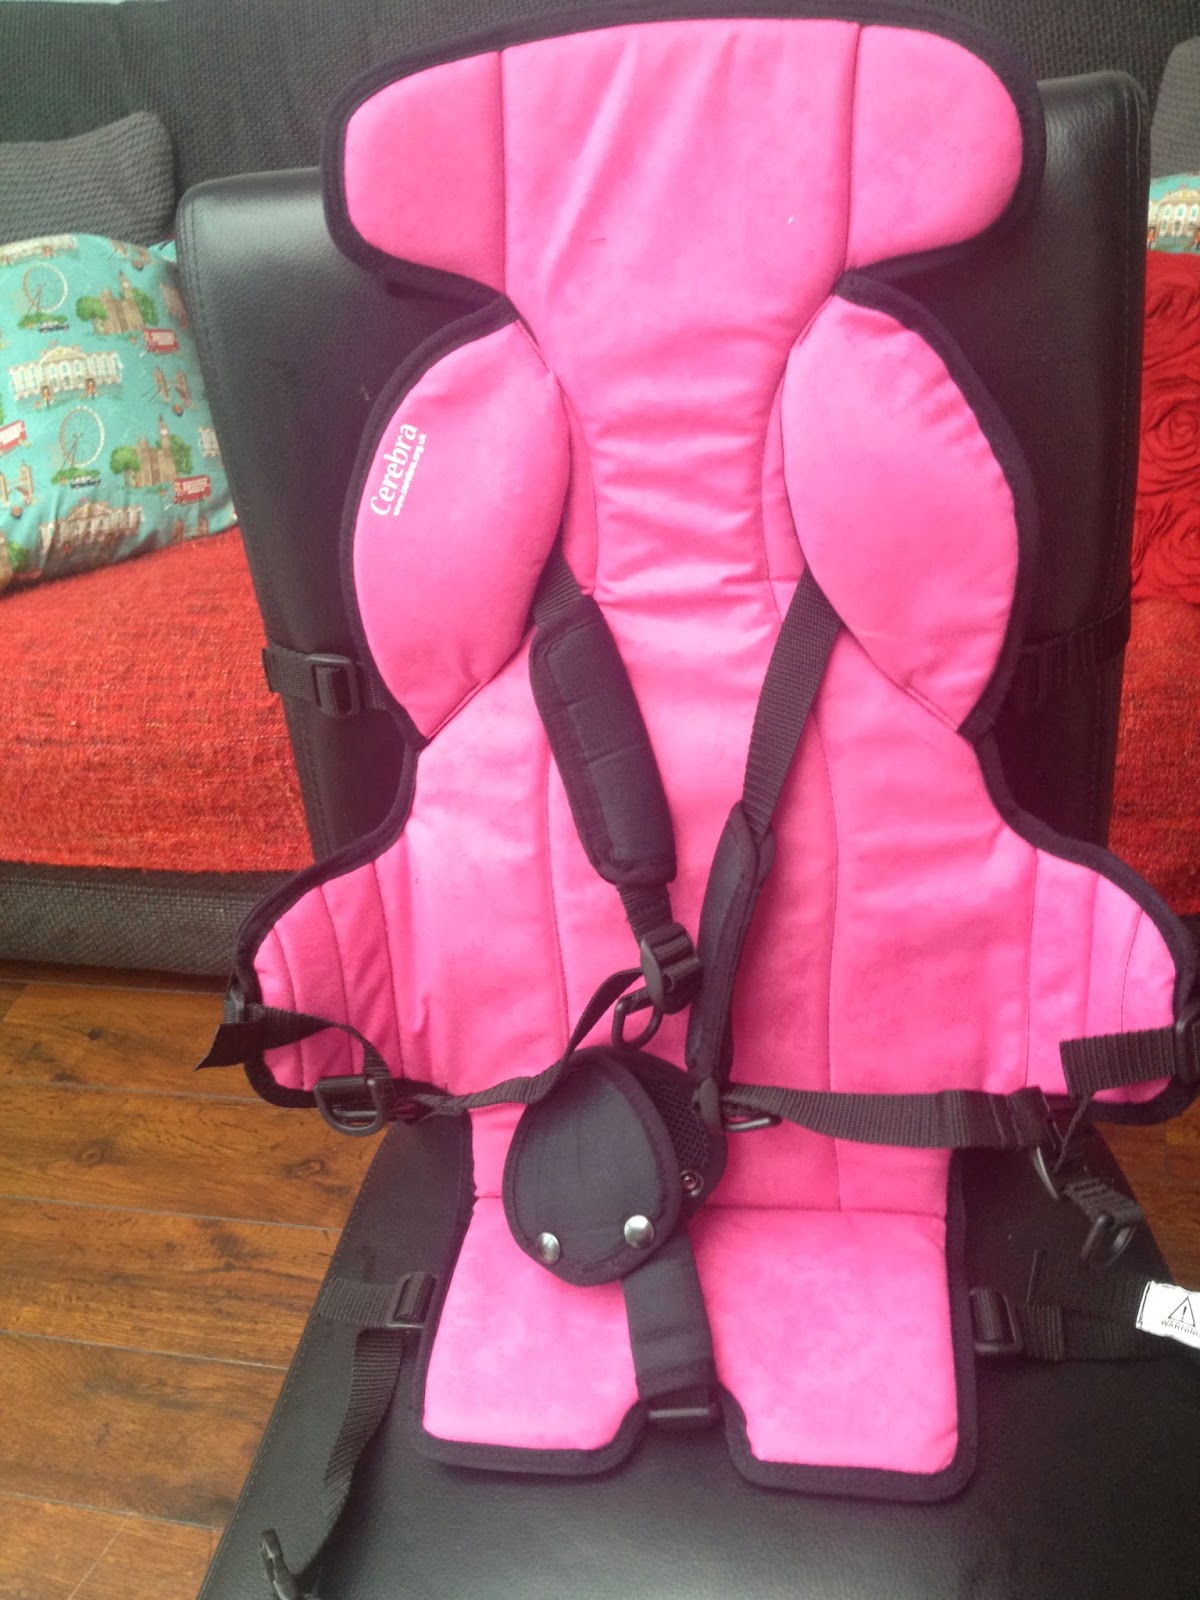 Was this in the Plan?: Product Review: Firefly GoTo Seat by Leckey